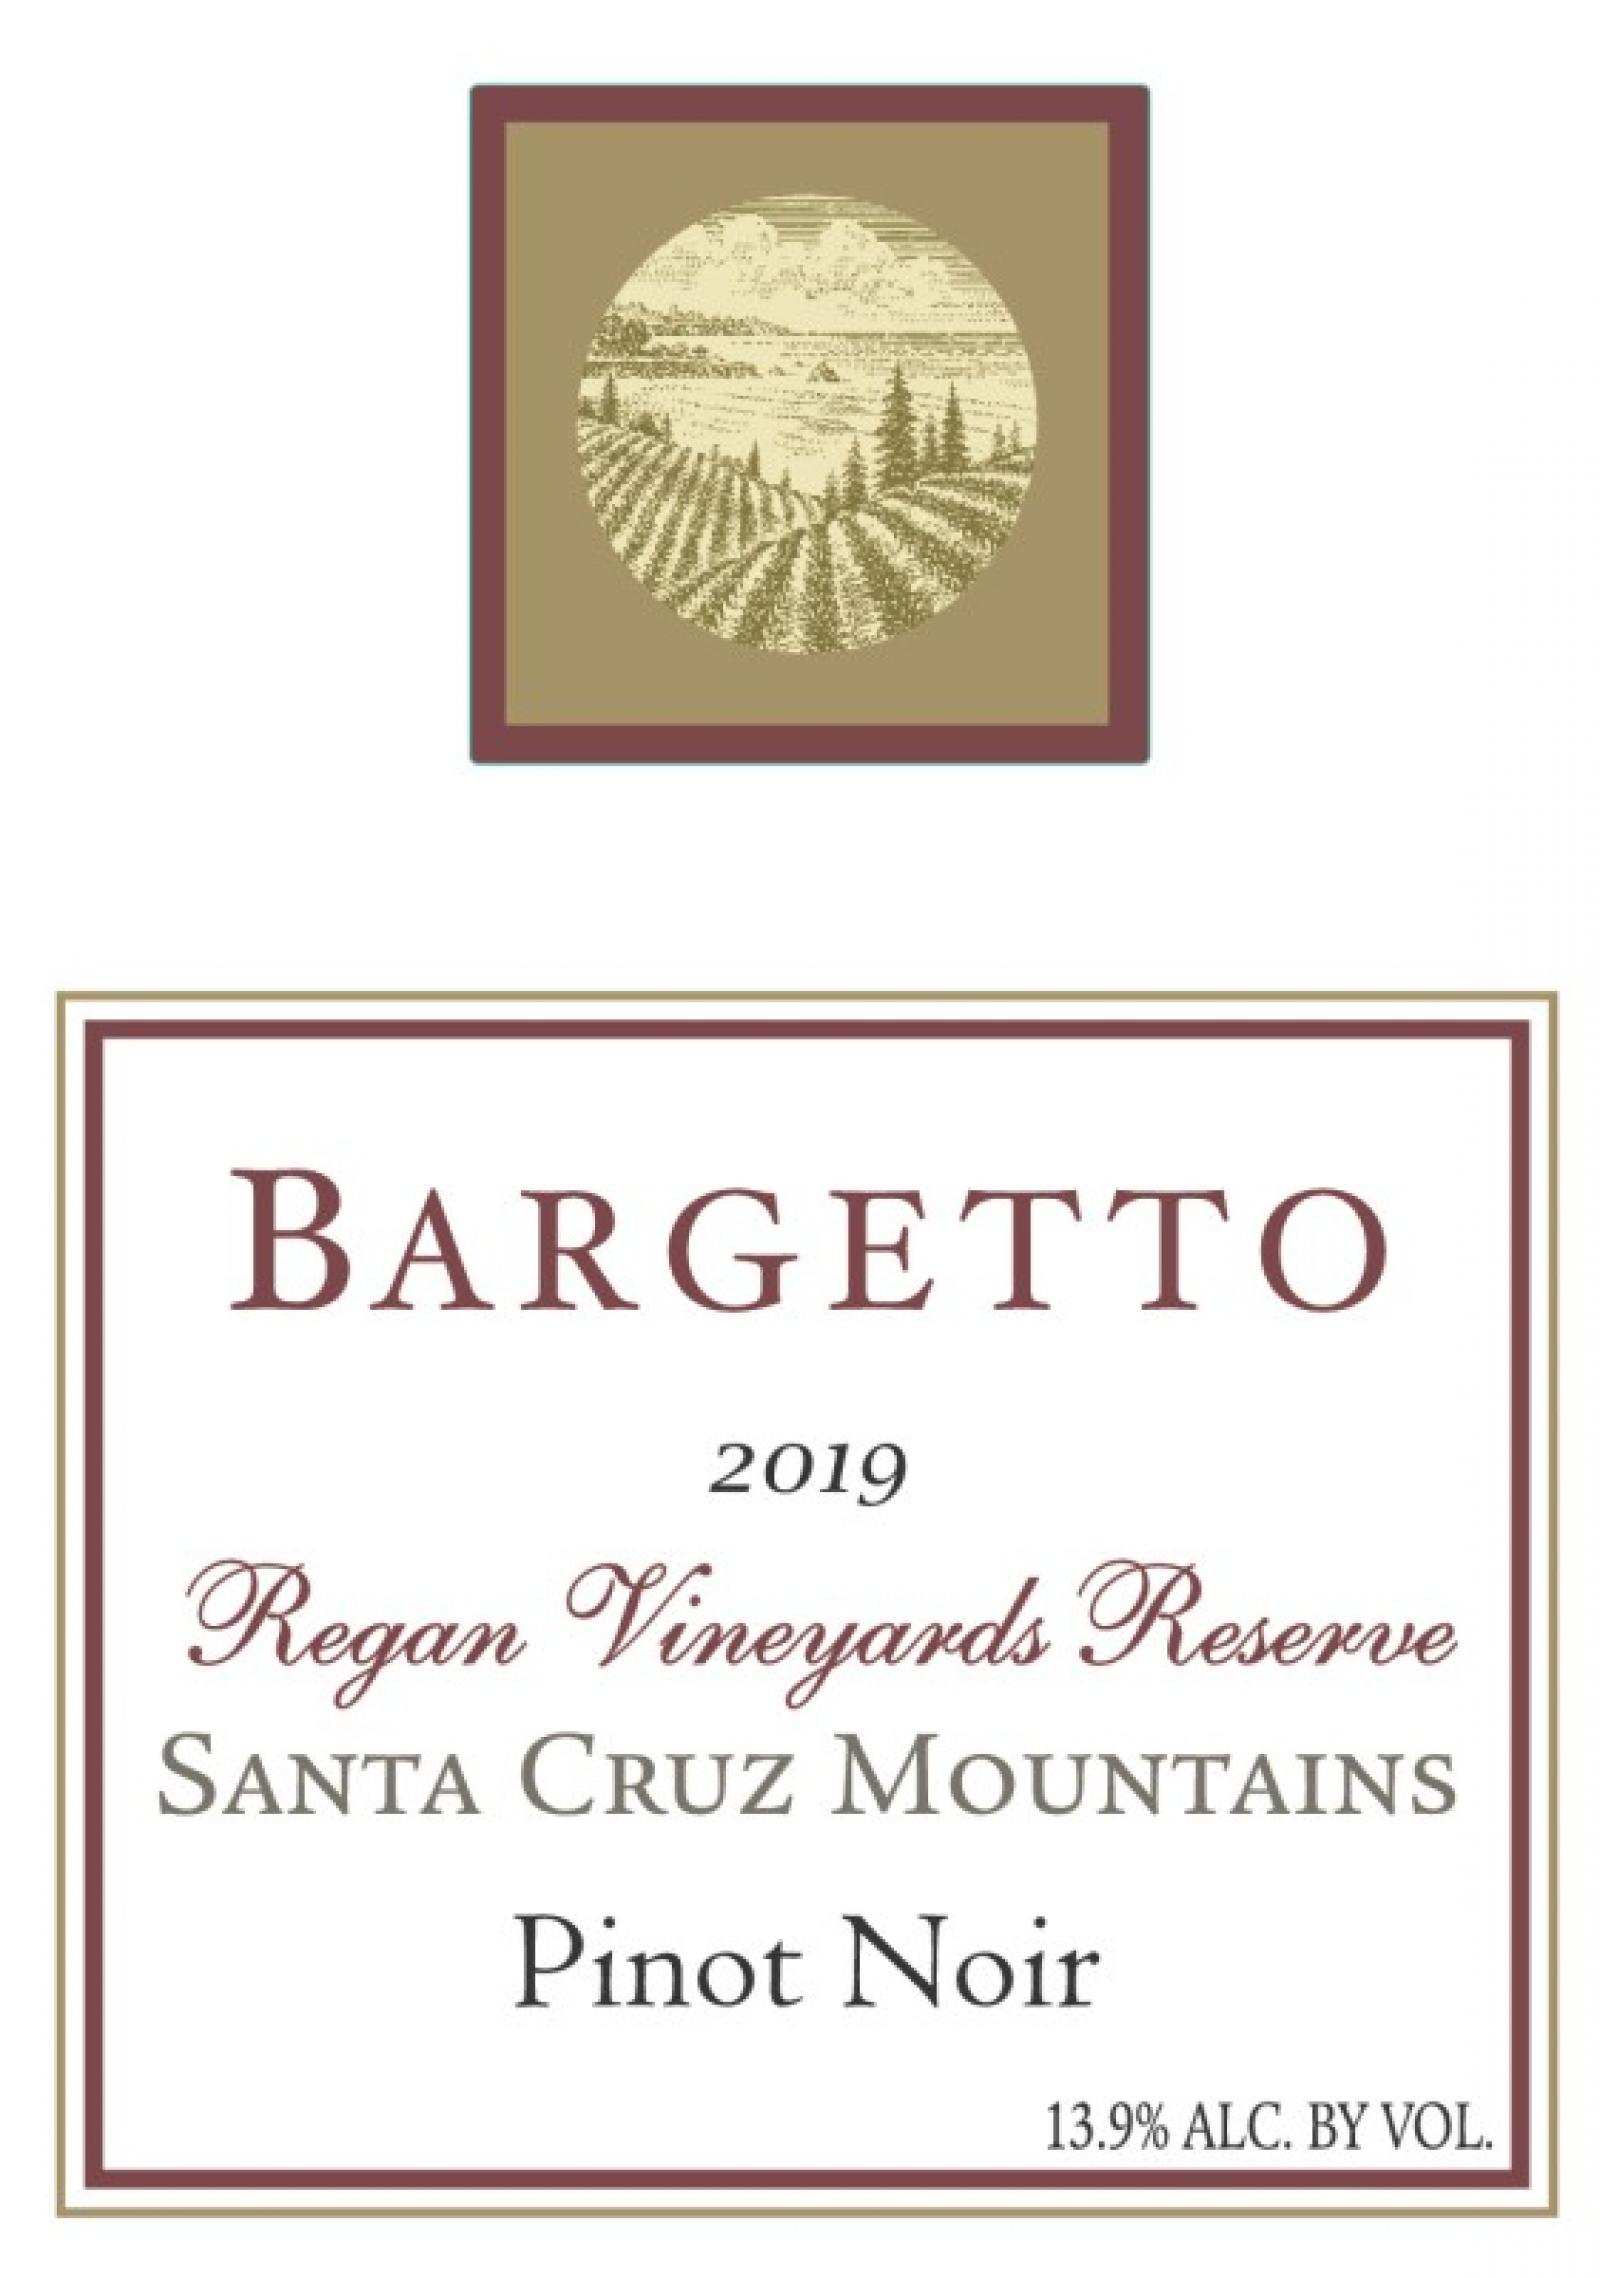 Bargetto Pinot Noir Reserve 2019